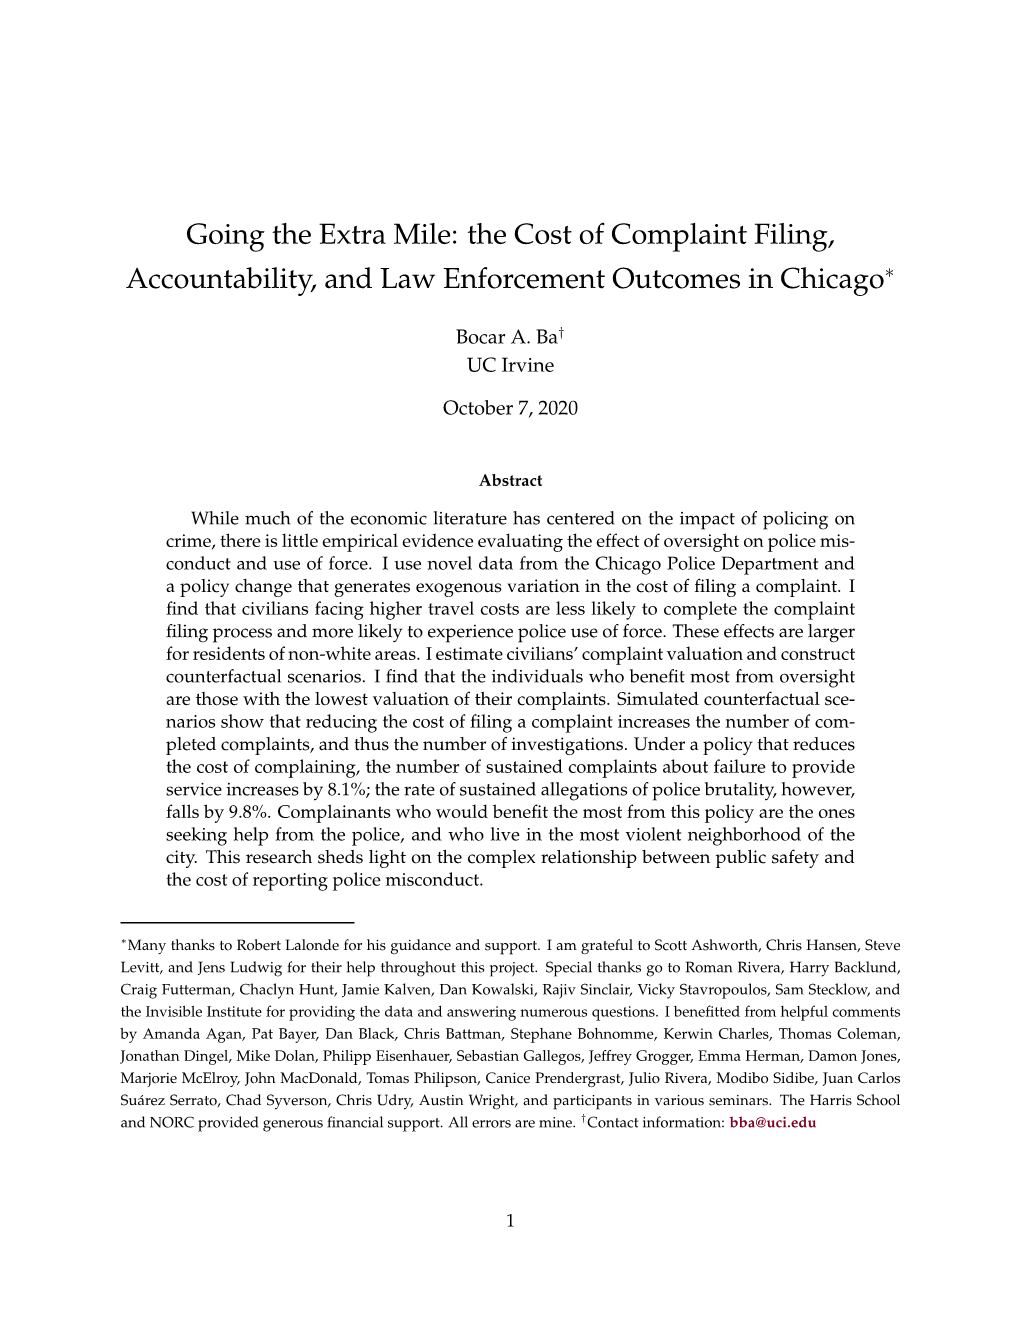 The Cost of Complaint Filing, Accountability, and Law Enforcement Outcomes in Chicagoъ